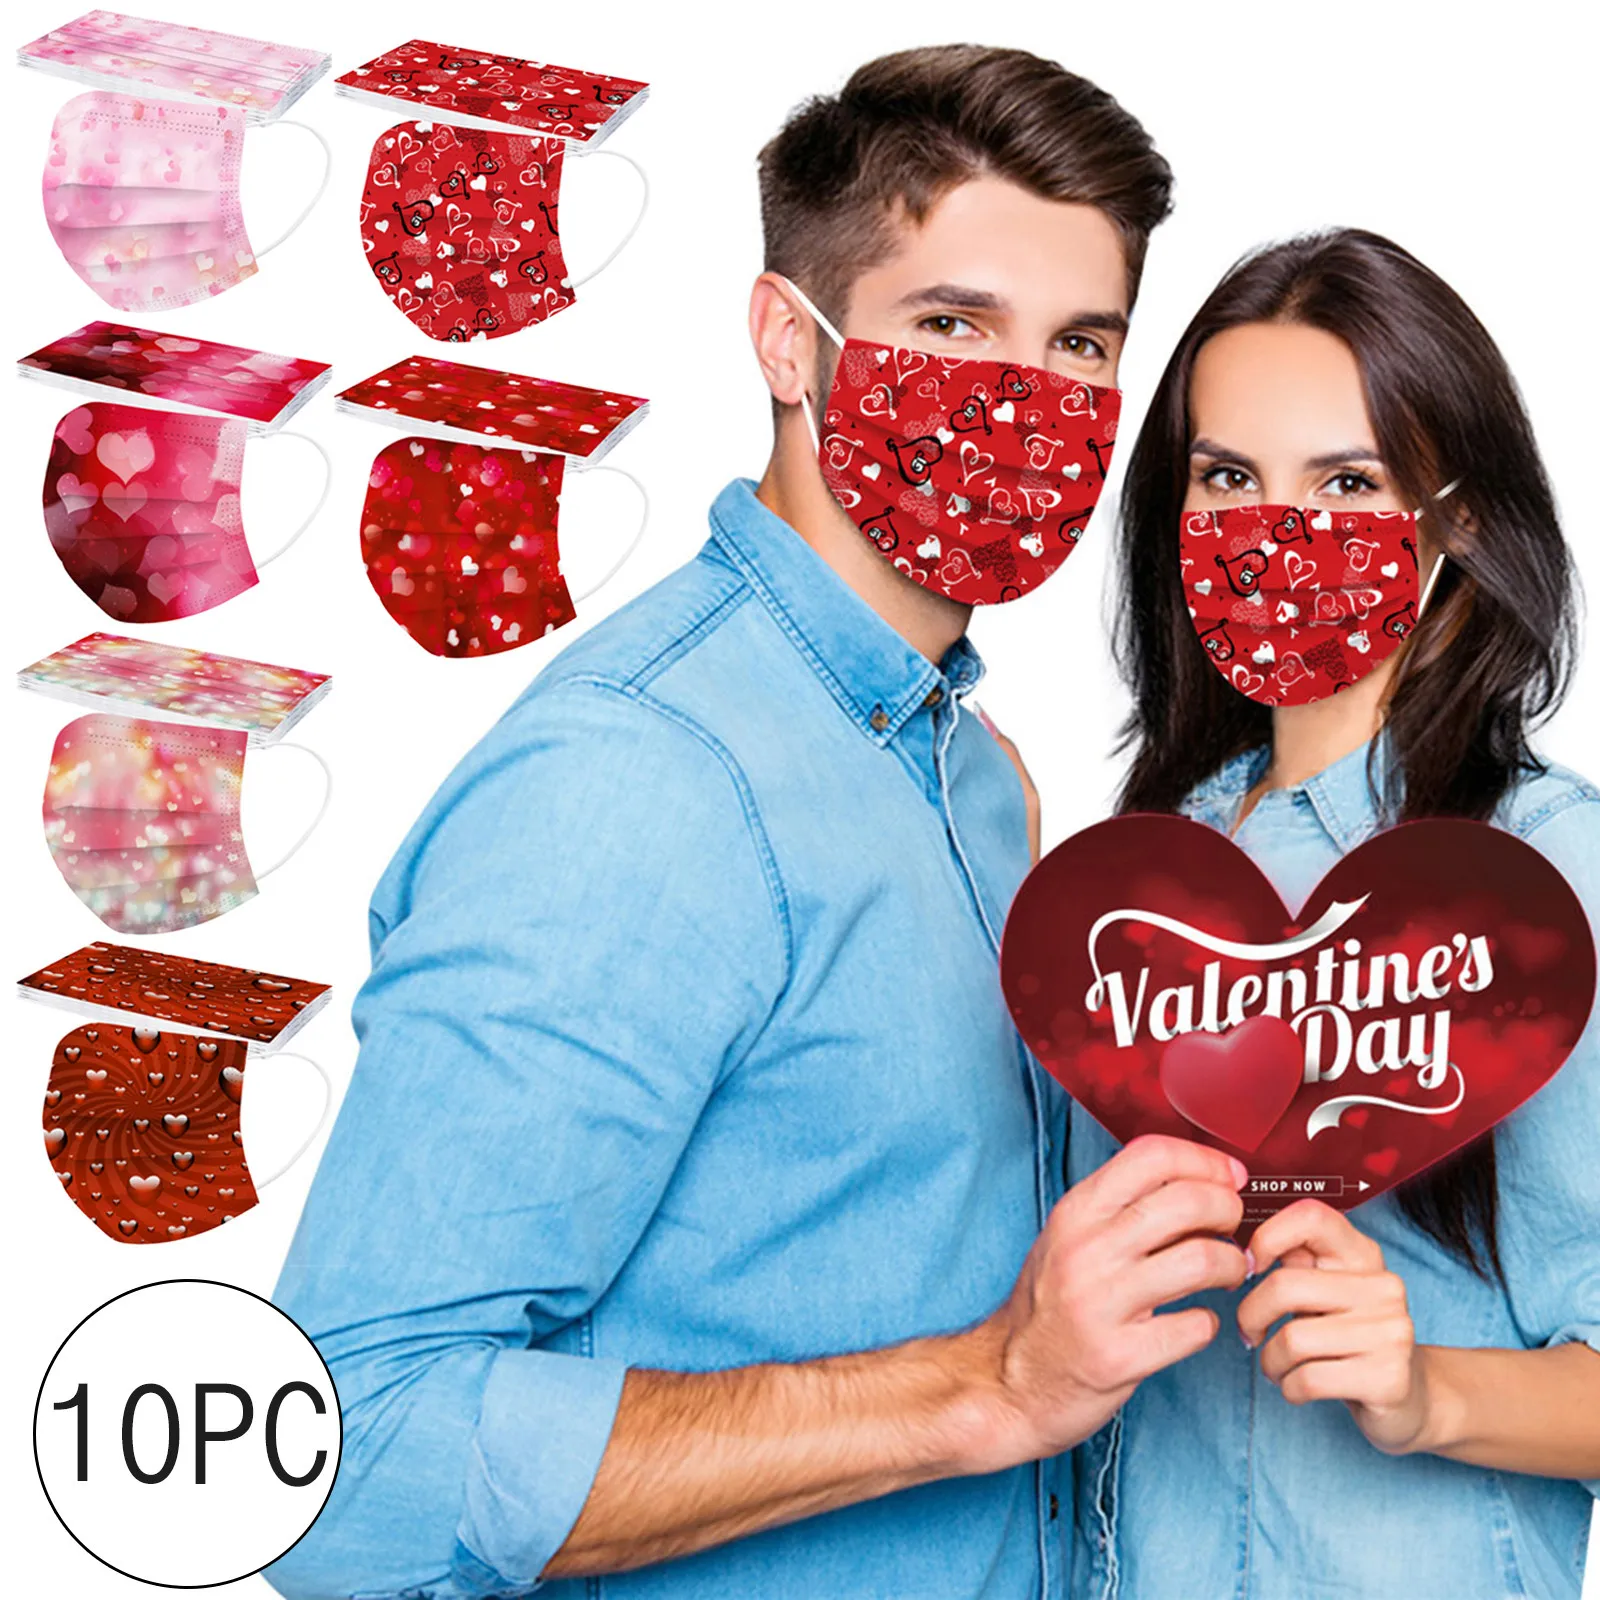 

10pc Disposable Adults Mask Valentine's Day Pink Heart Print Party Face Mask 3ply Ear Loop Lover Mascarillas Halloween Cosplay